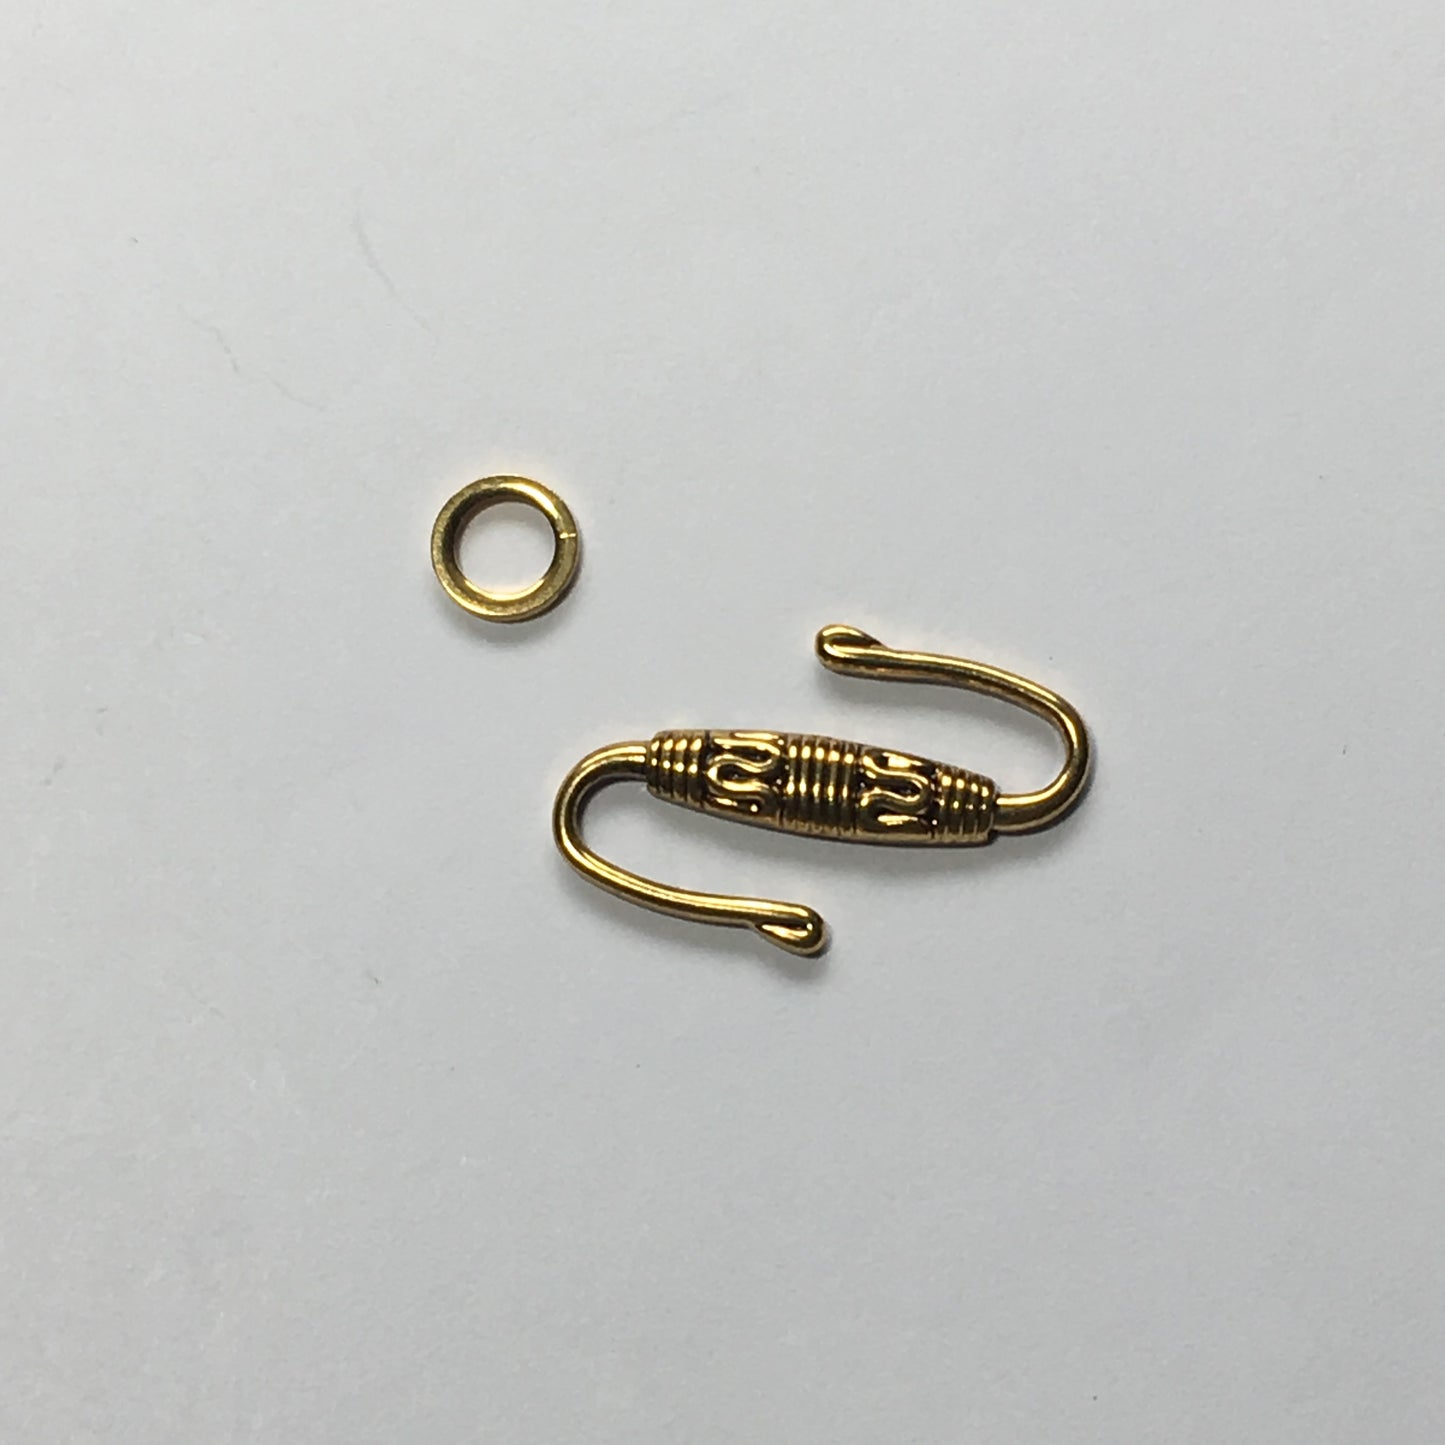 Antique Gold S Hook with Carved Middle and Solid Ring, 25 mm With 7 mm Ring